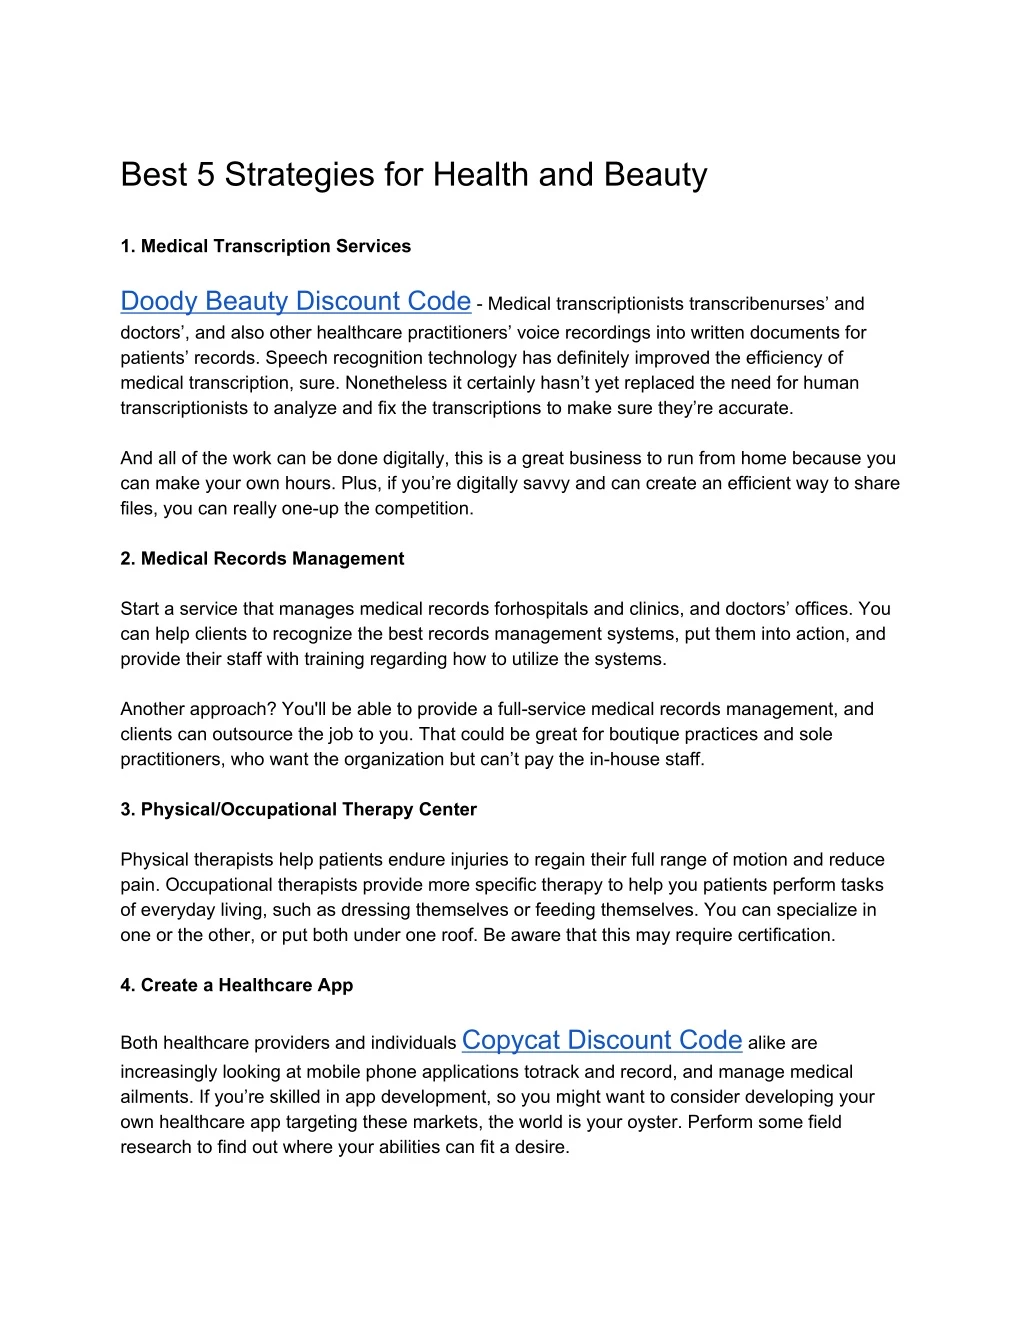 best 5 strategies for health and beauty